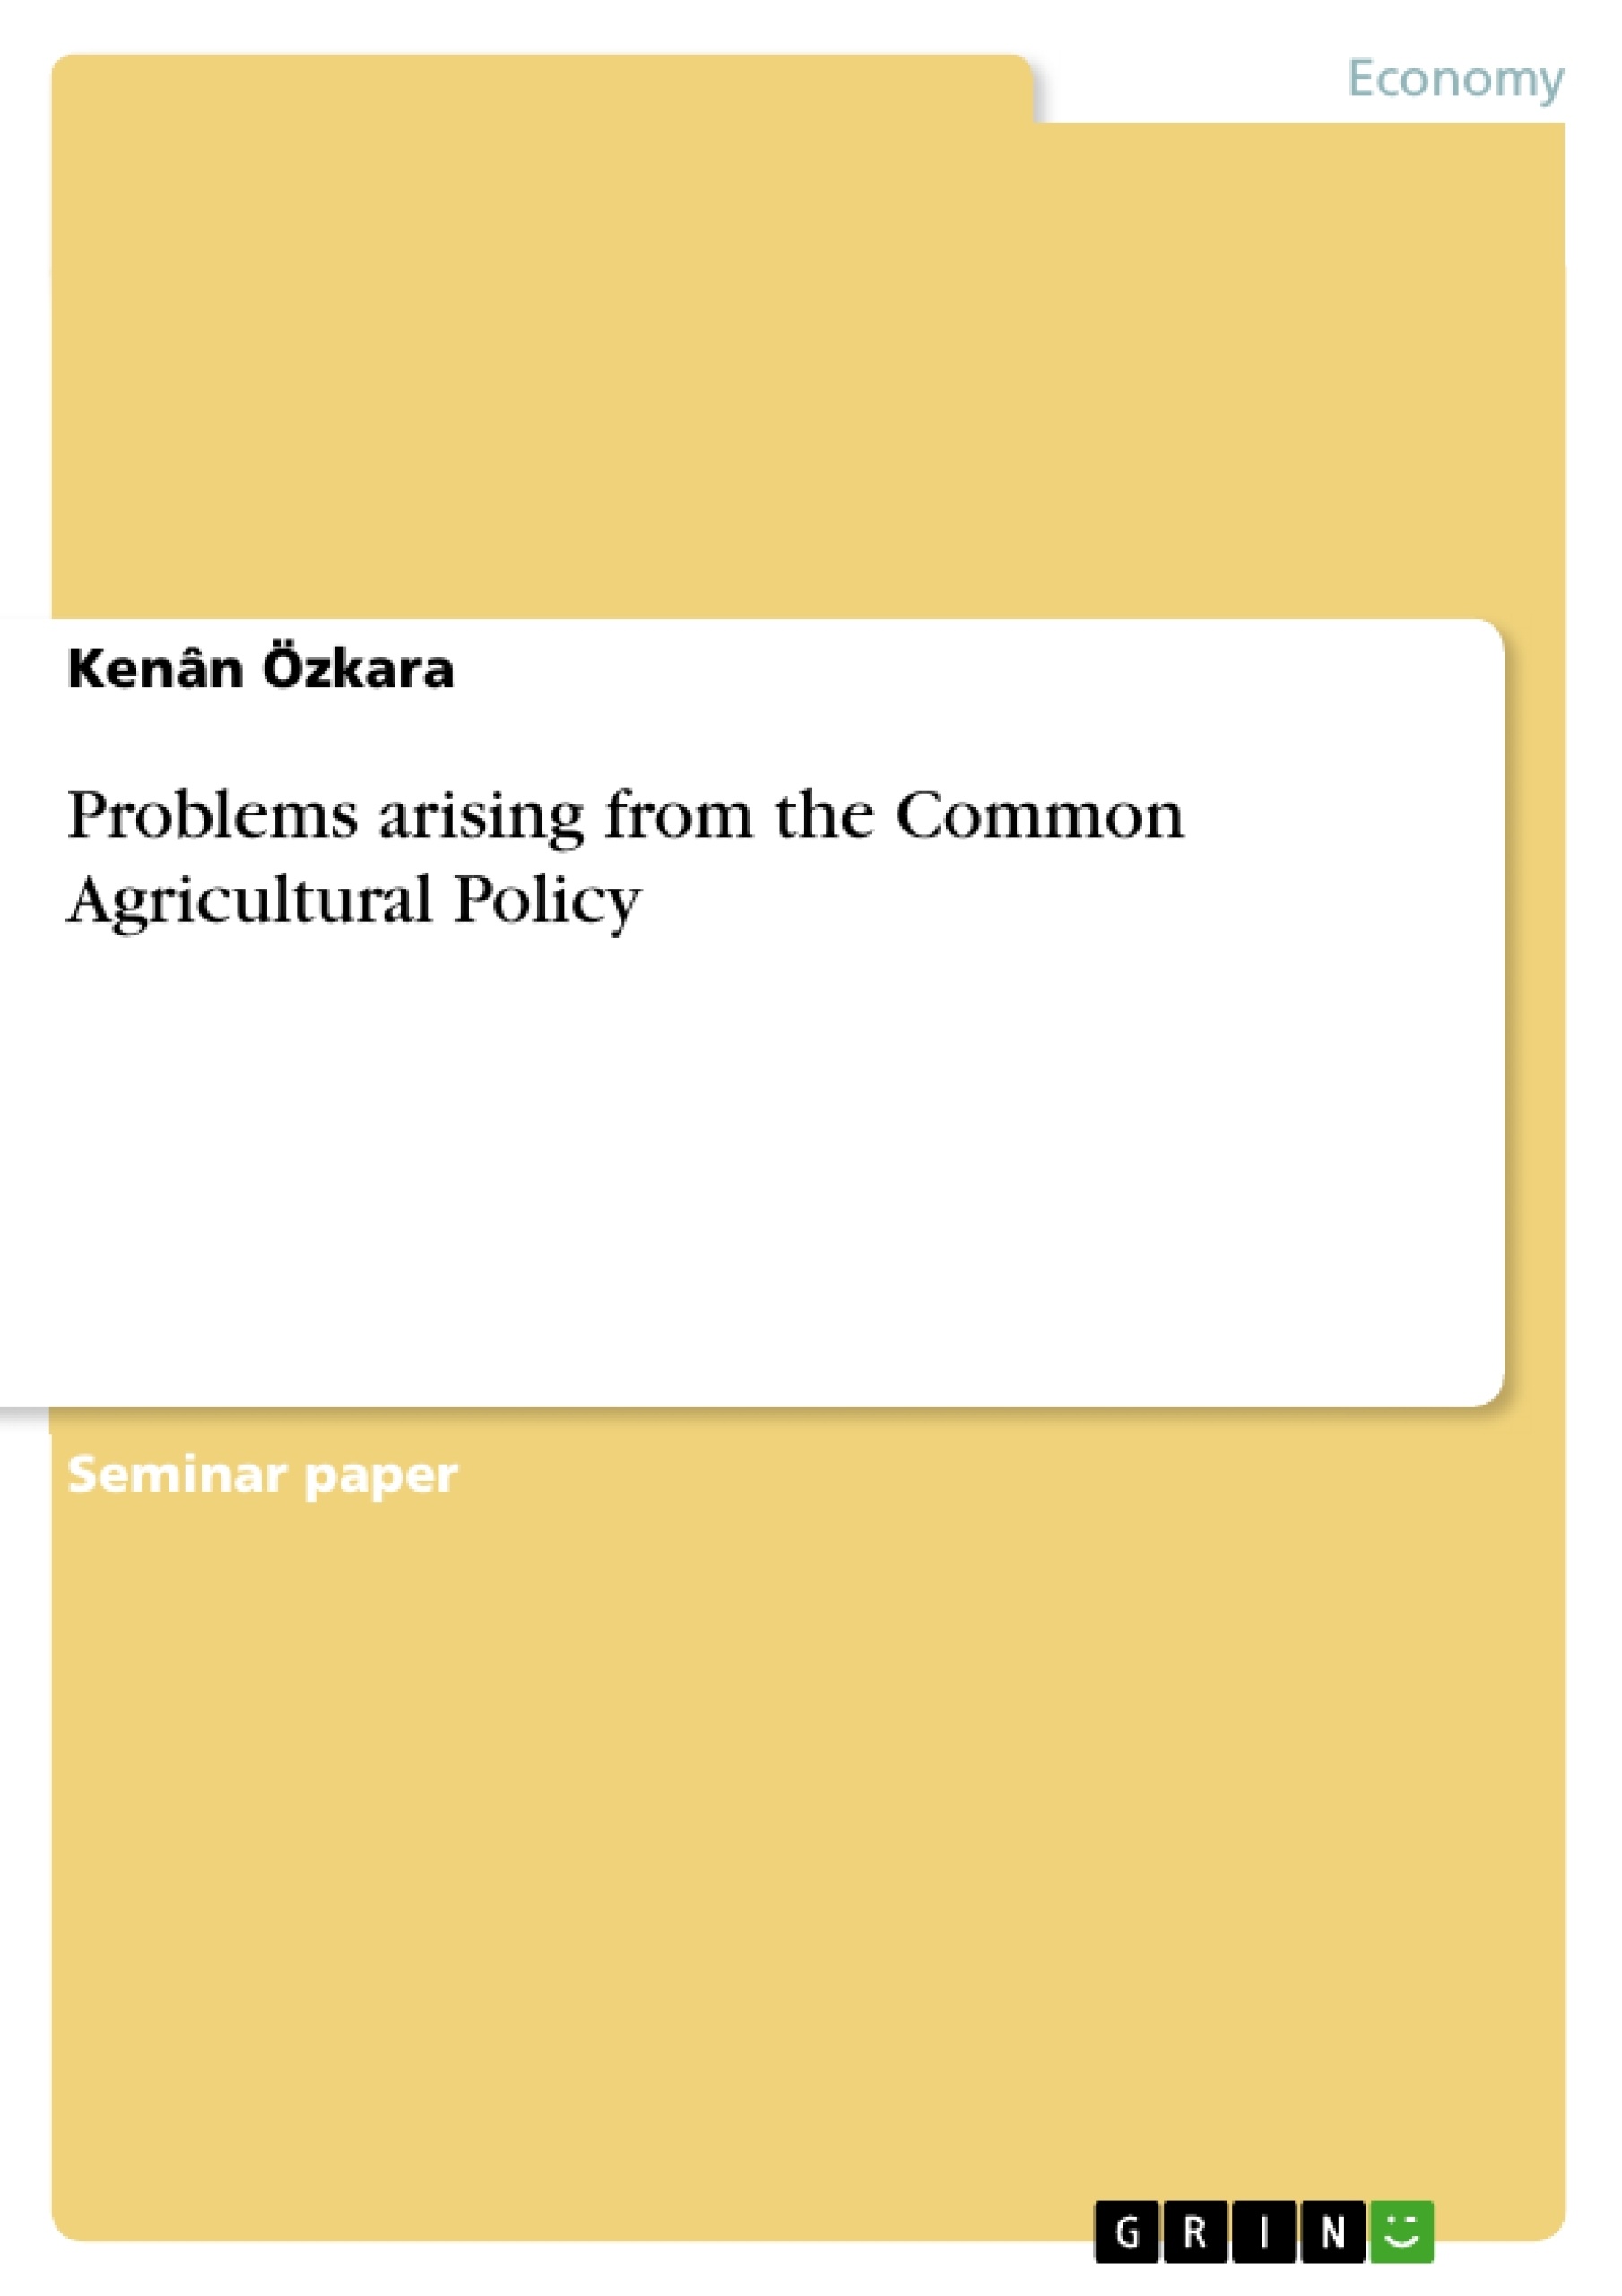 Title: Problems arising from the Common Agricultural Policy